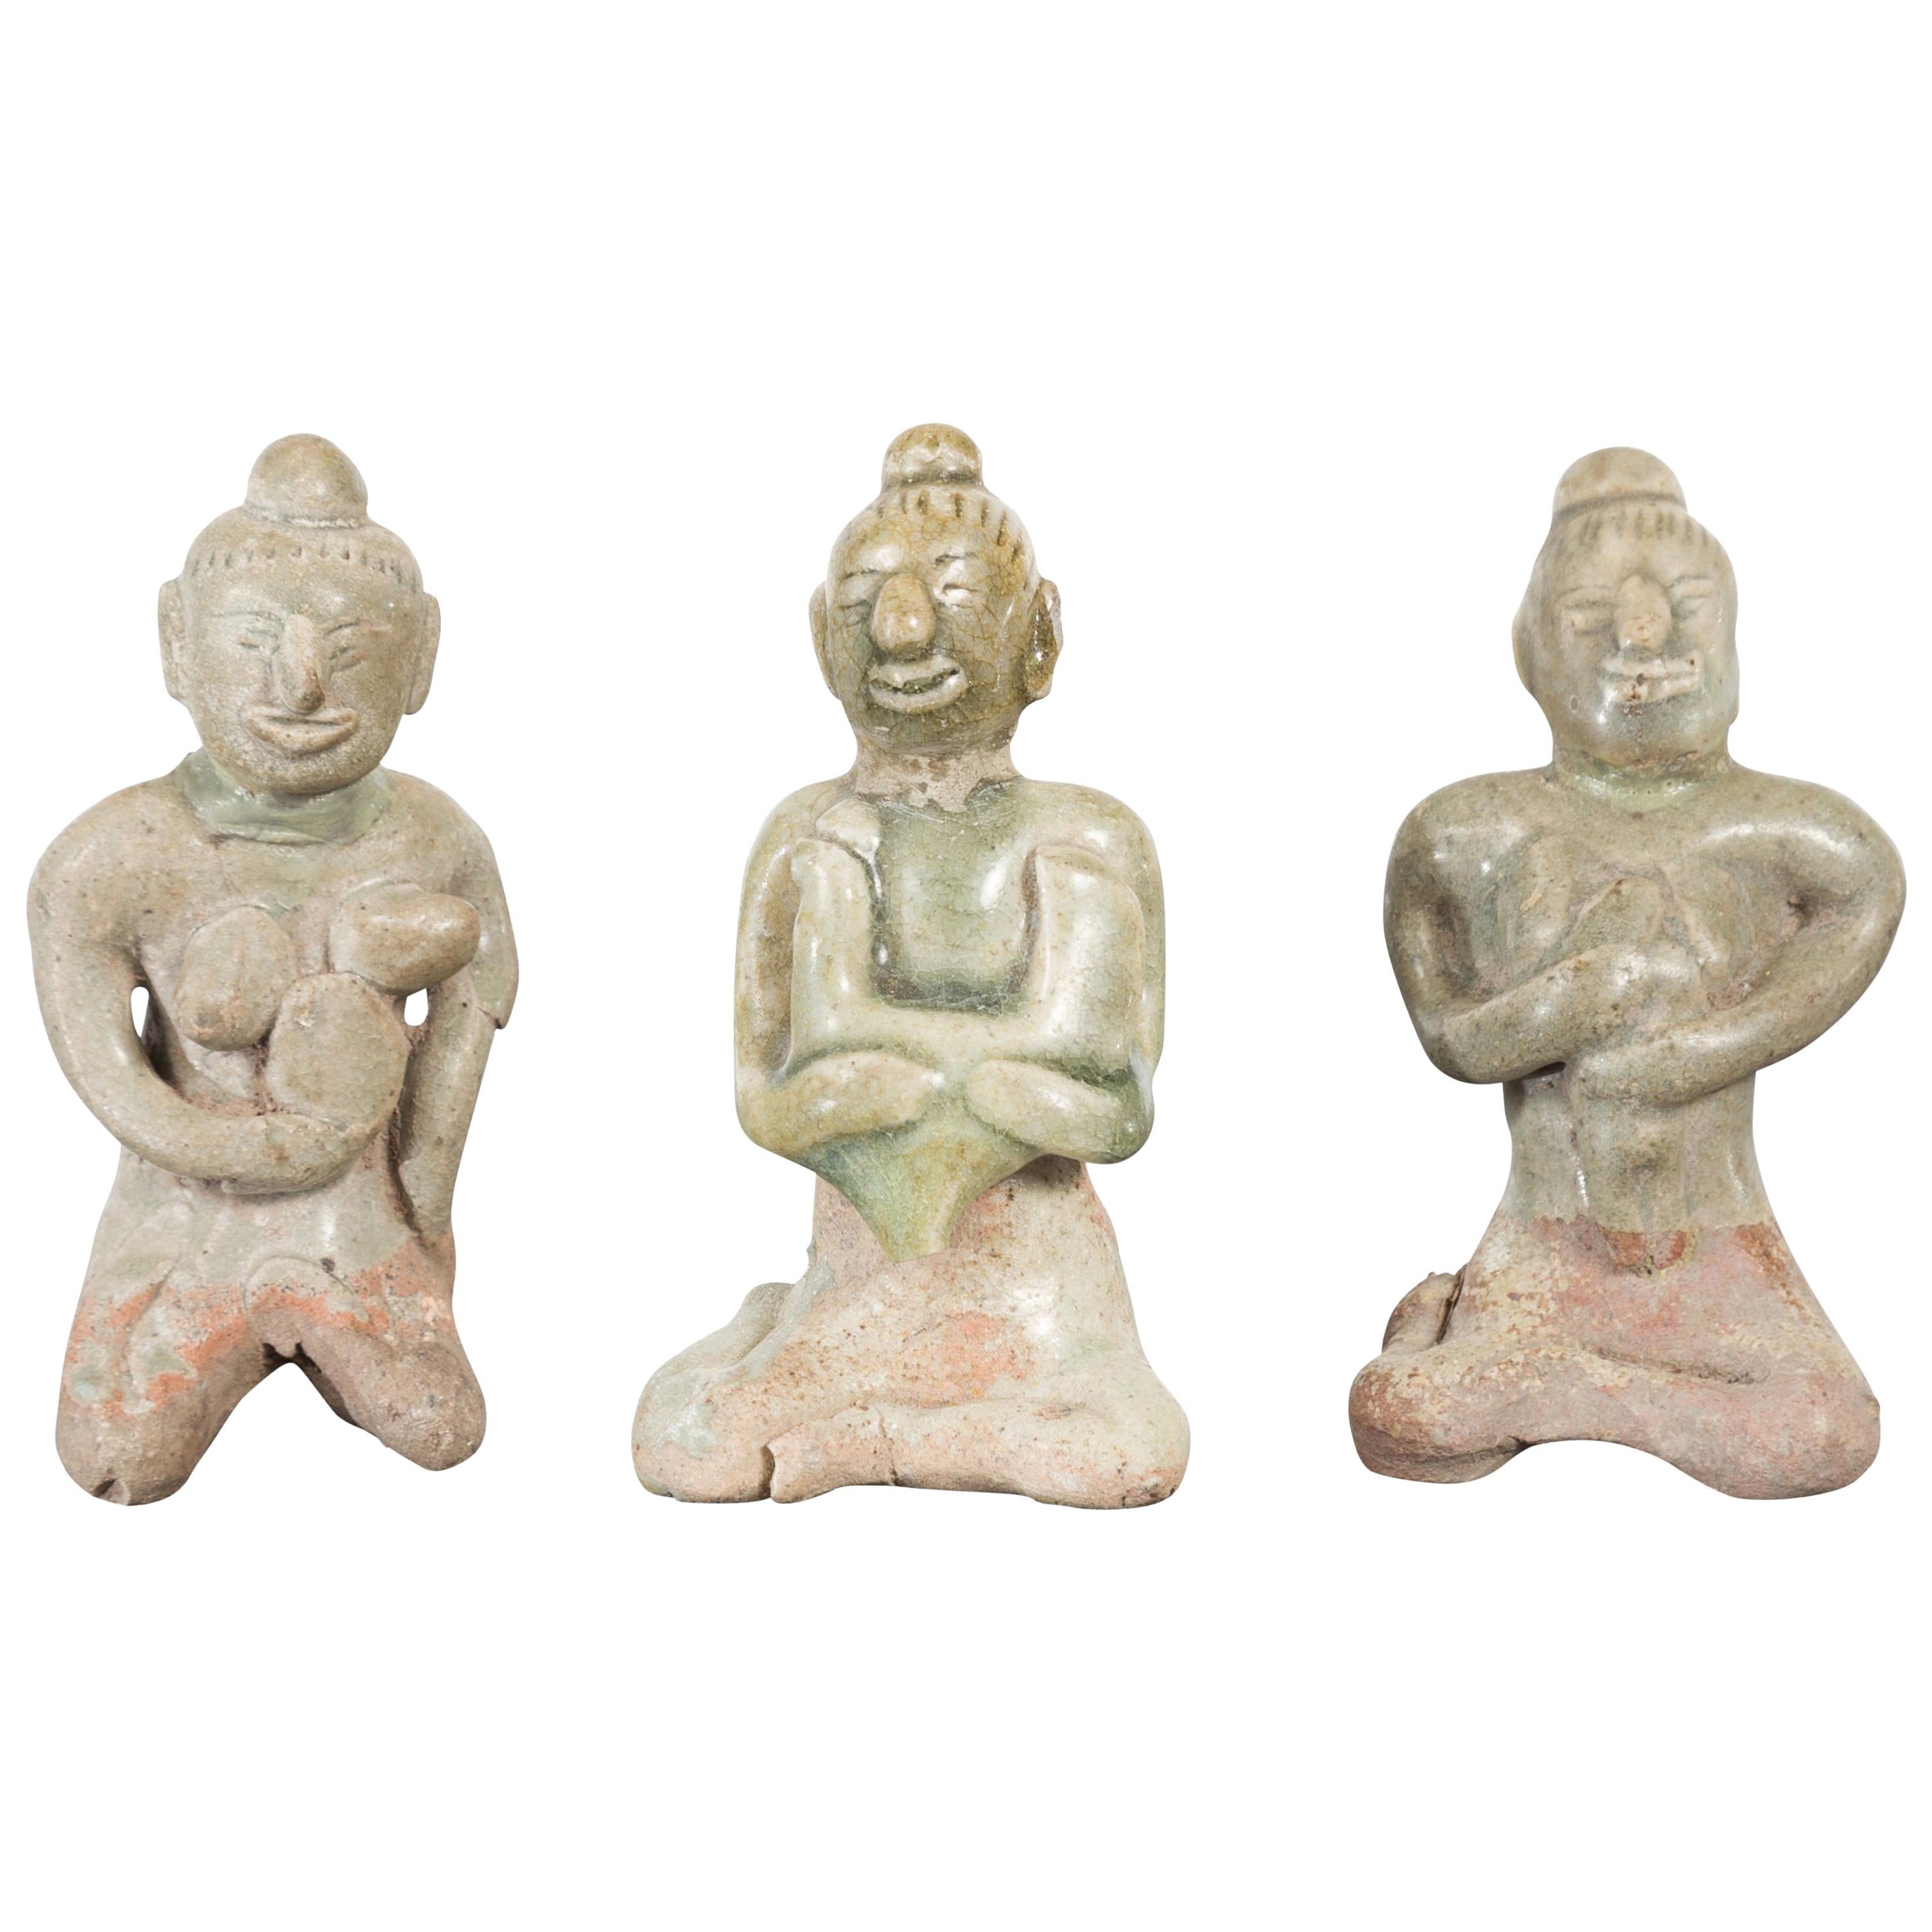 Set of Three 14th or 15th Century Ceramic Fertility Figures from Thailand For Sale